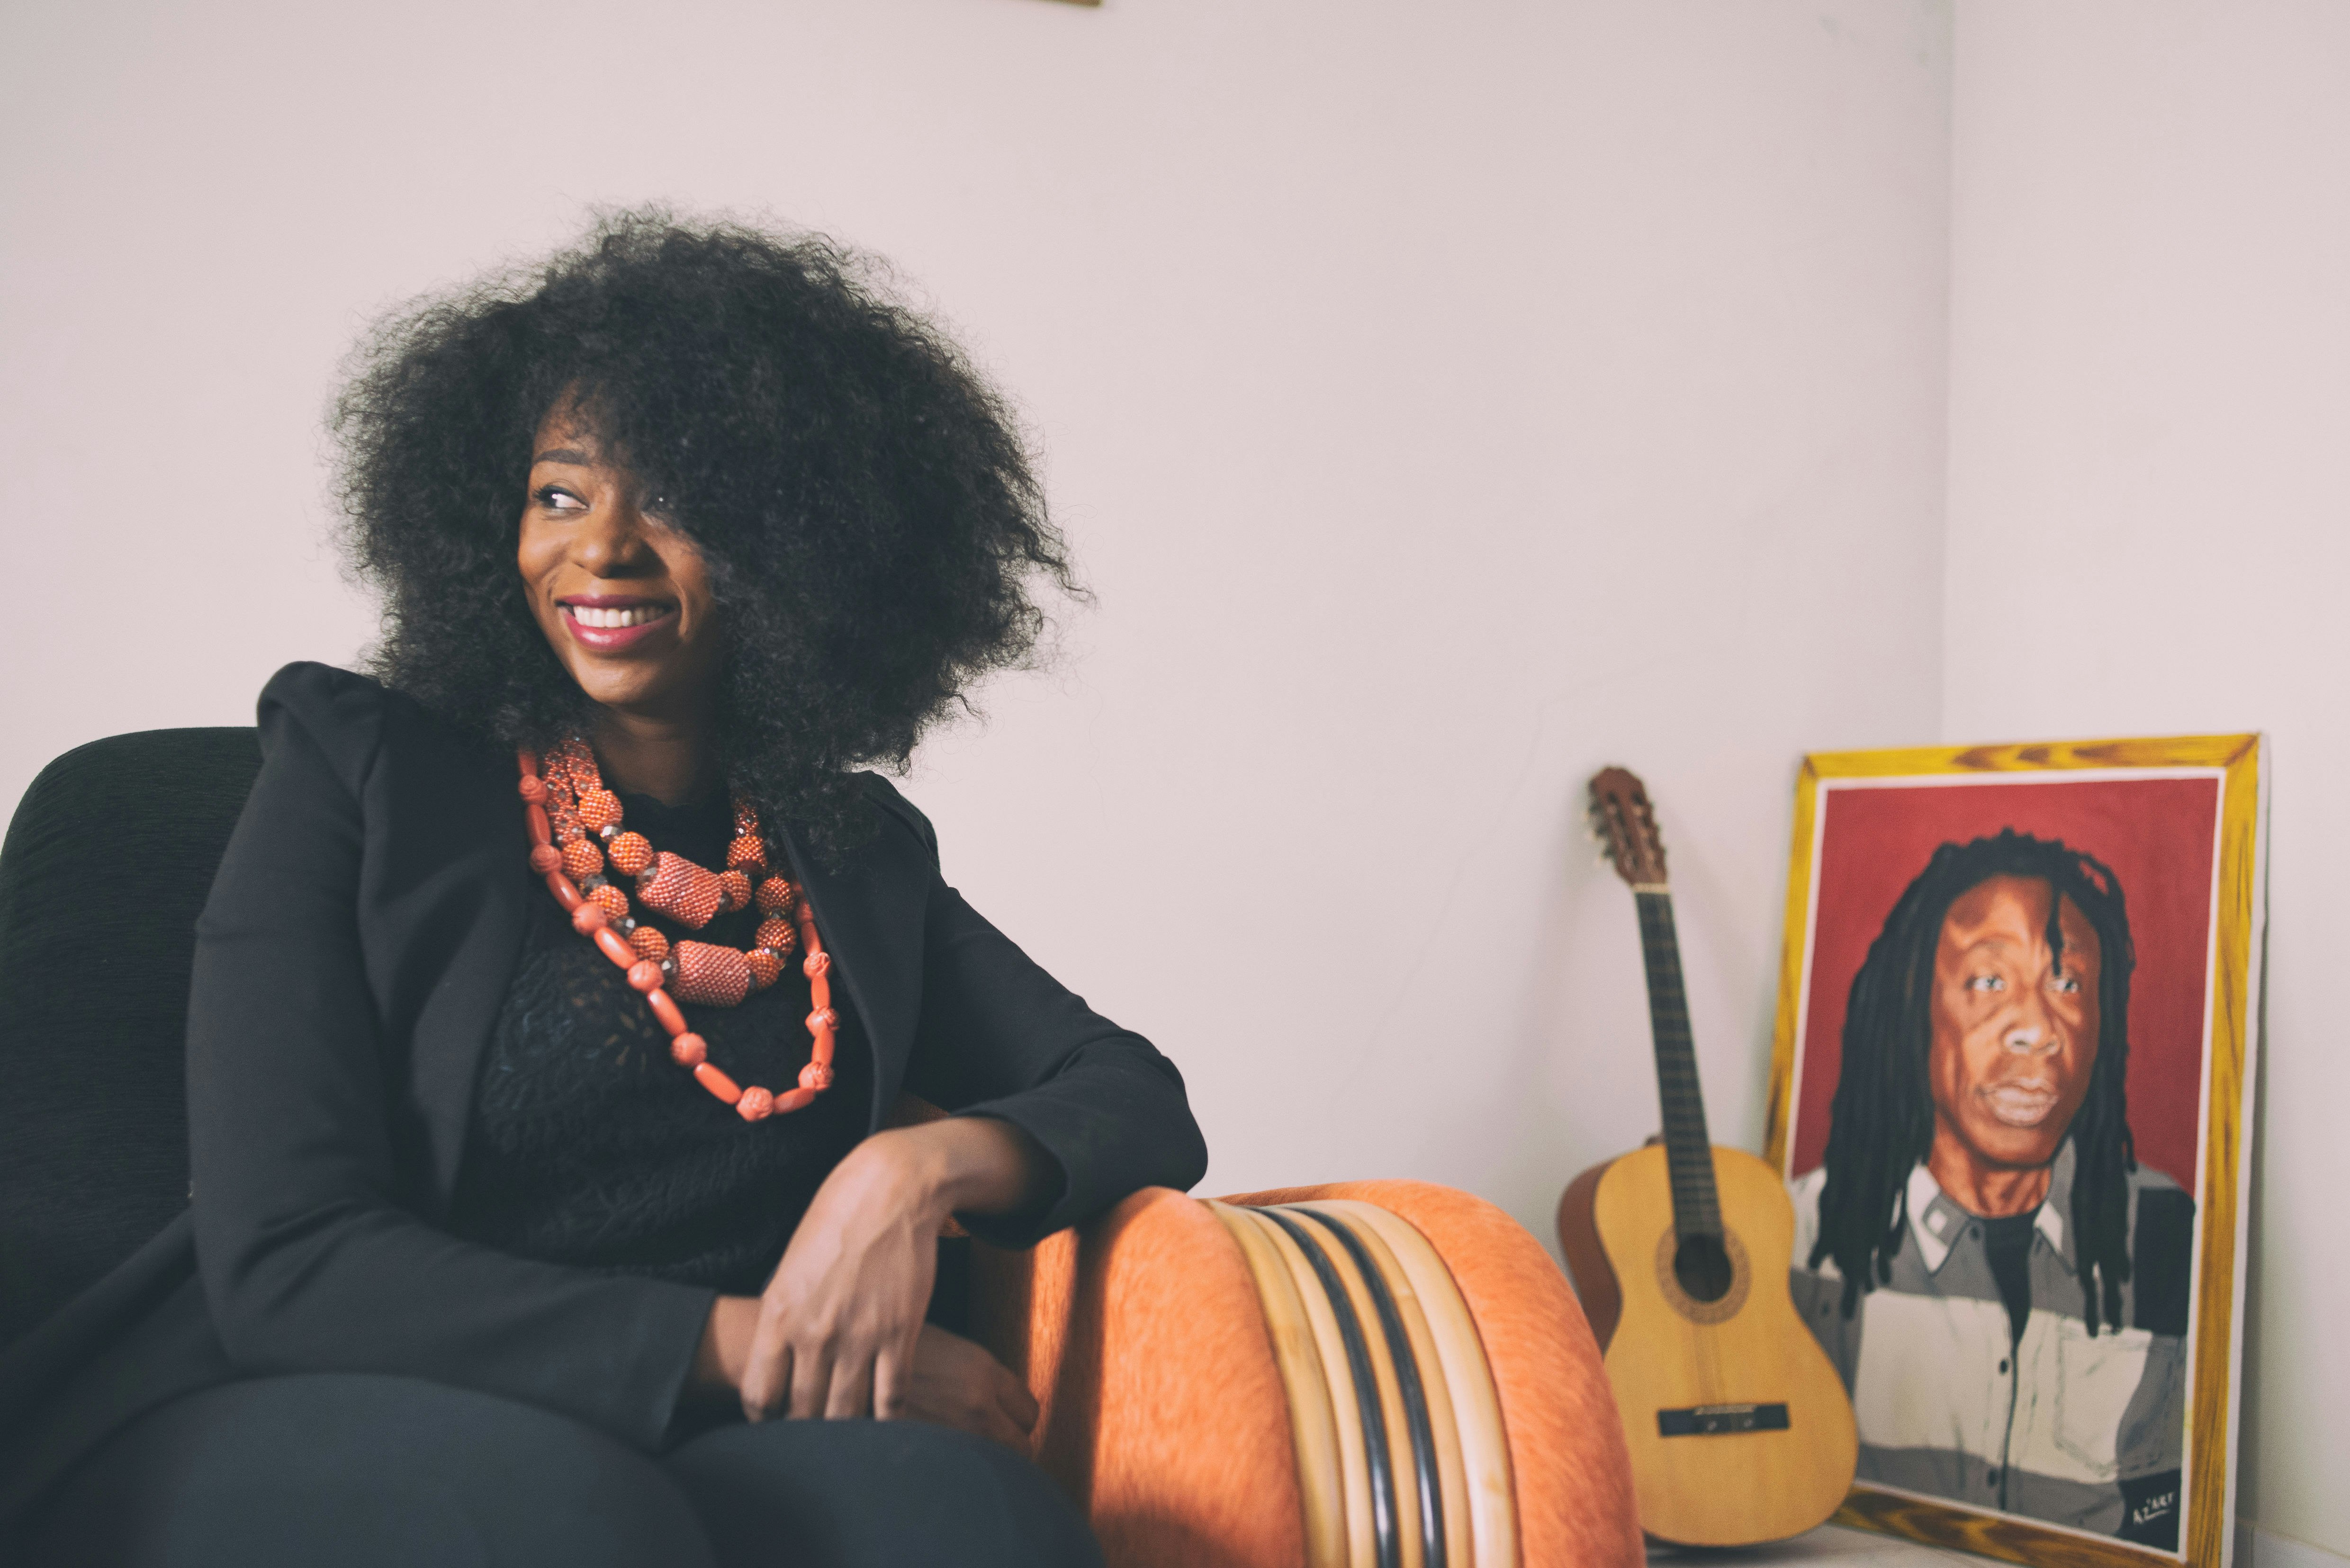 Adiouza, dressed all in black with three large coral-coloured necklaces, sits in an arm chair; a portrait of her father, the musician Ousmane. Diallo, alias Ouza, sits on a table to her side.